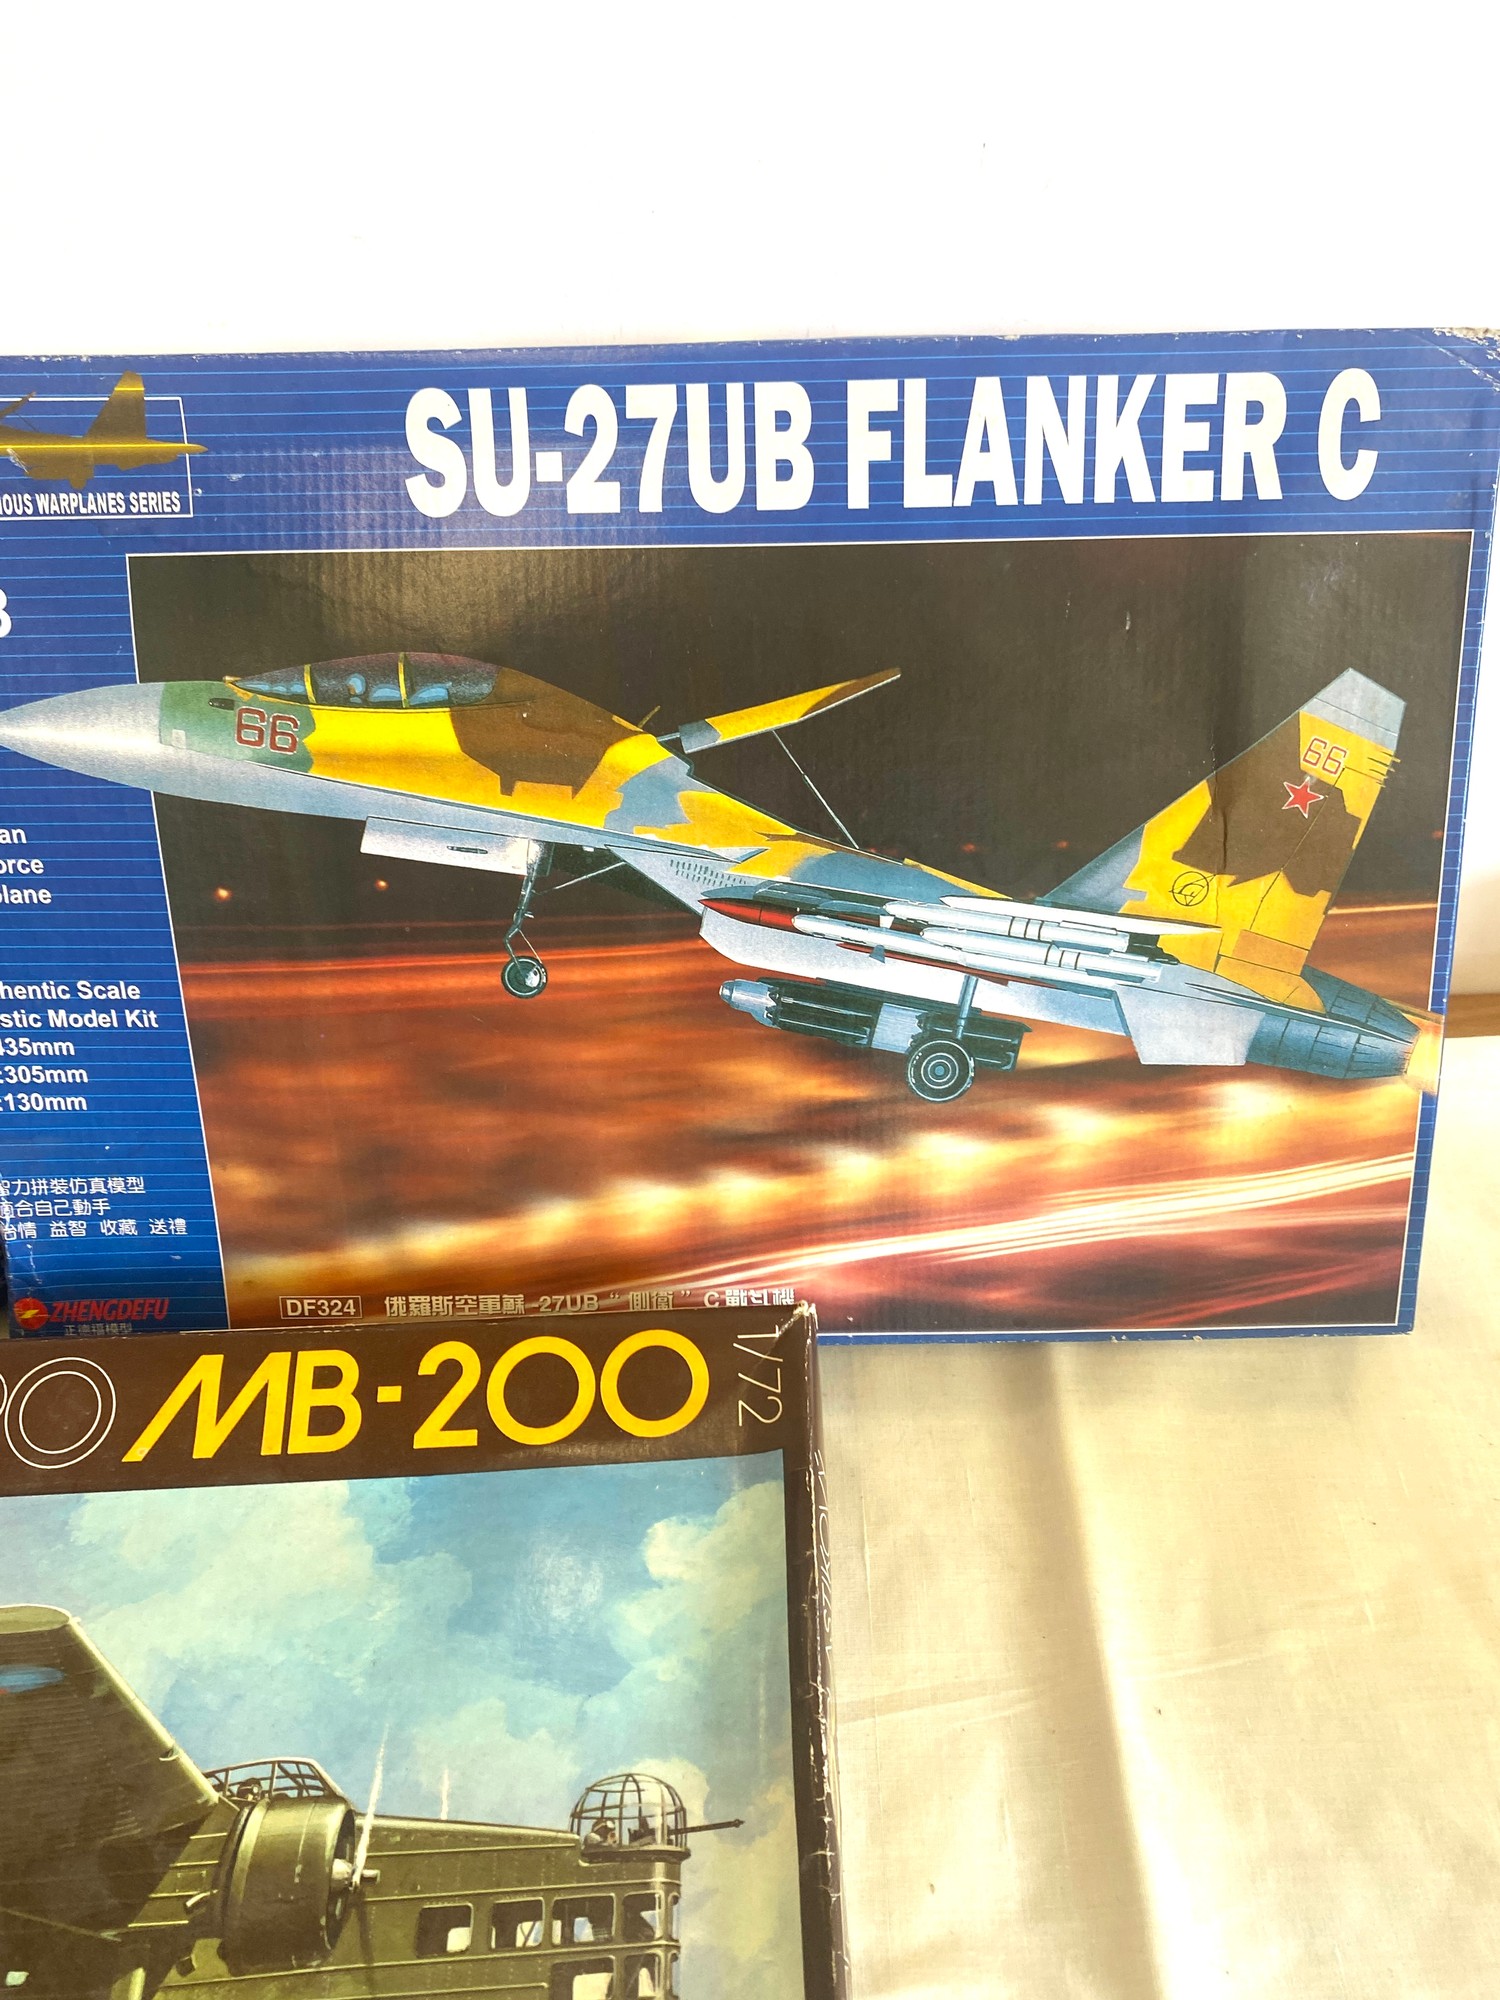 Selection of 4 boxed model air crafts includes, Revell Avro Shackleton MR.3, SU 27ub flawker c, Aero - Bild 3 aus 3